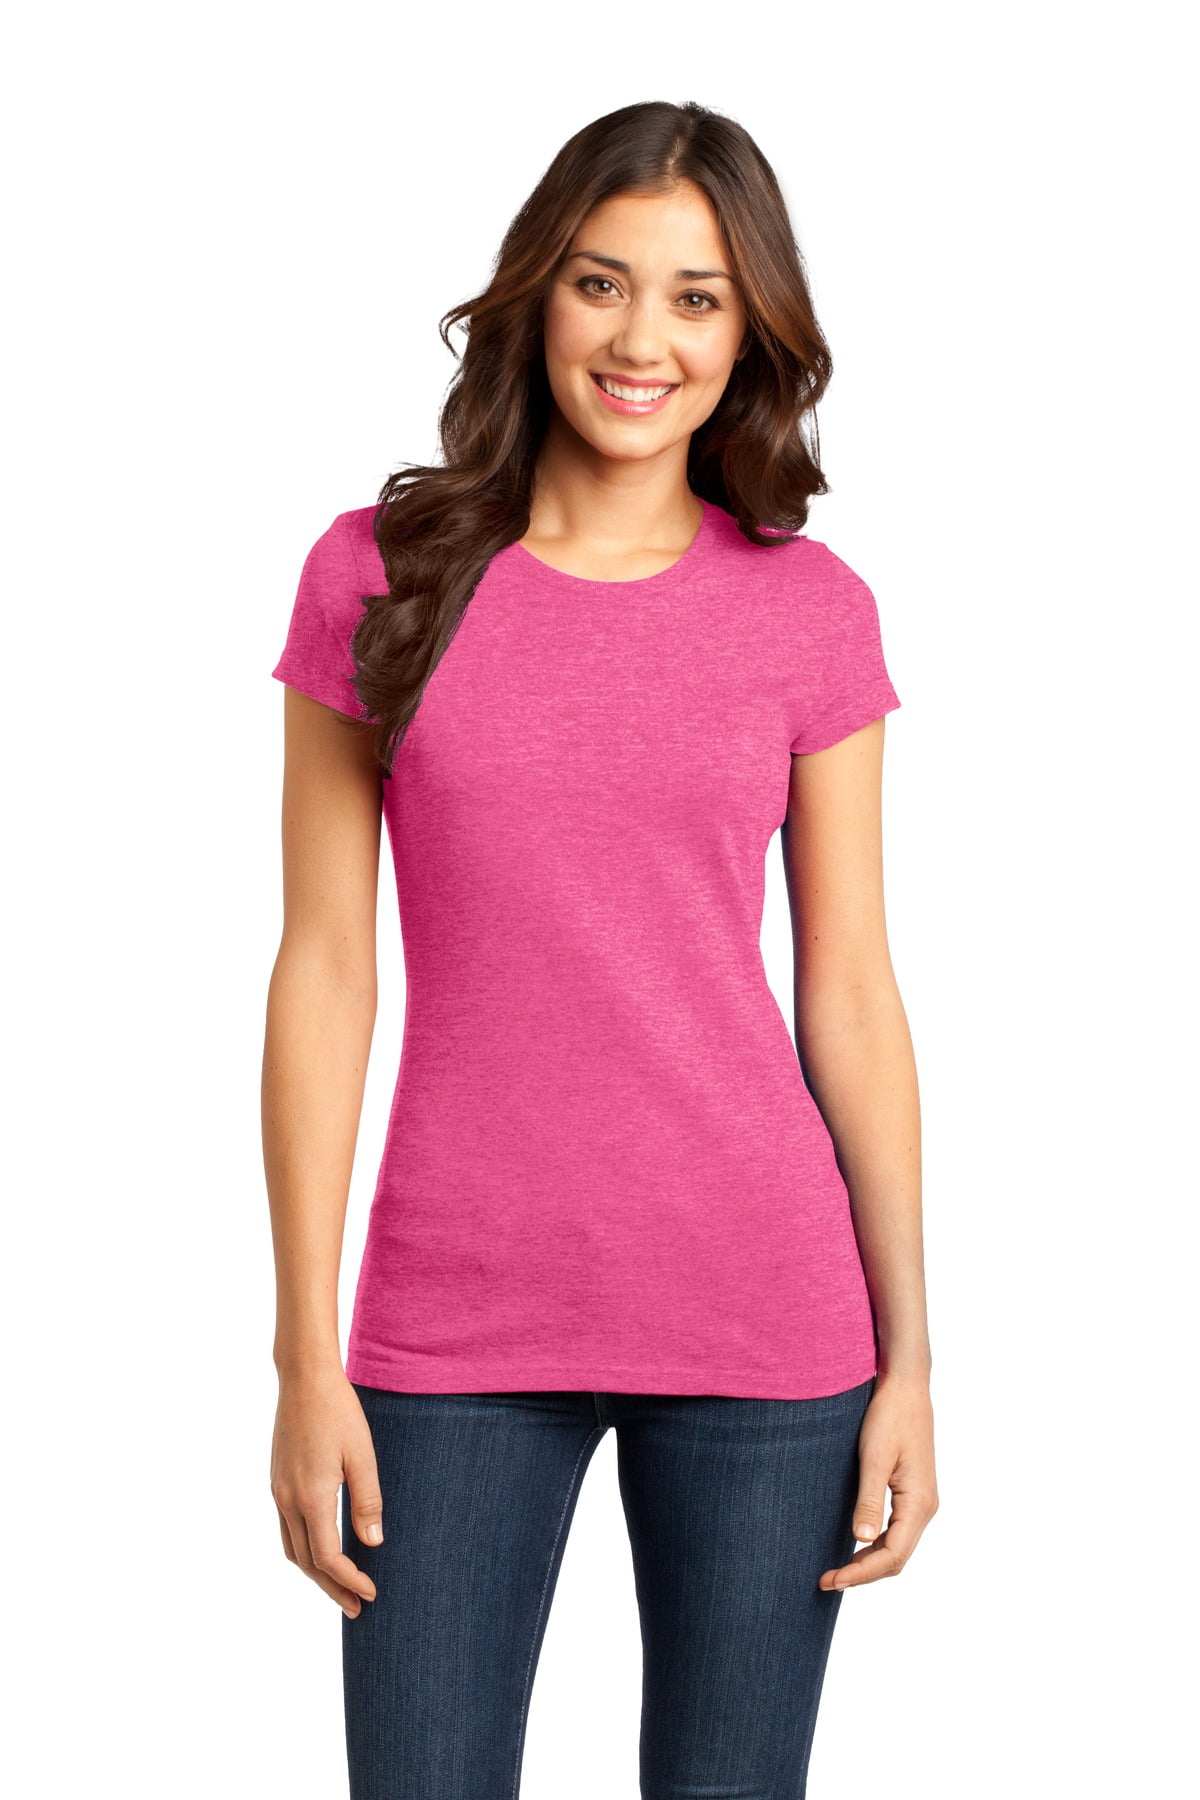 District DT6001 Juniors Very Important Tee , Fuchsia Frost, XXL